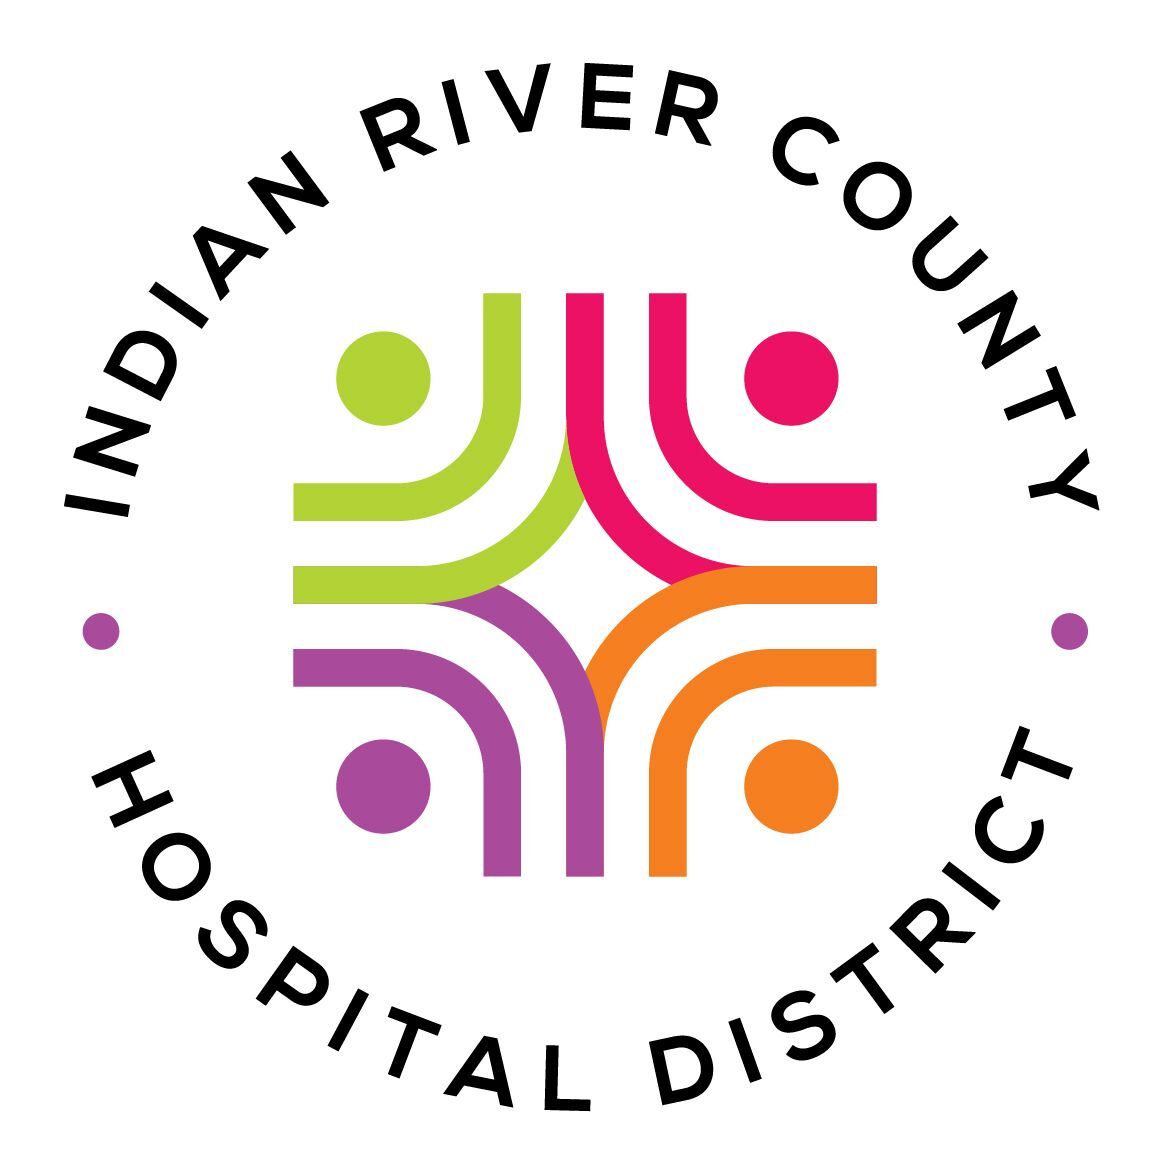 Indian River County Hospital District